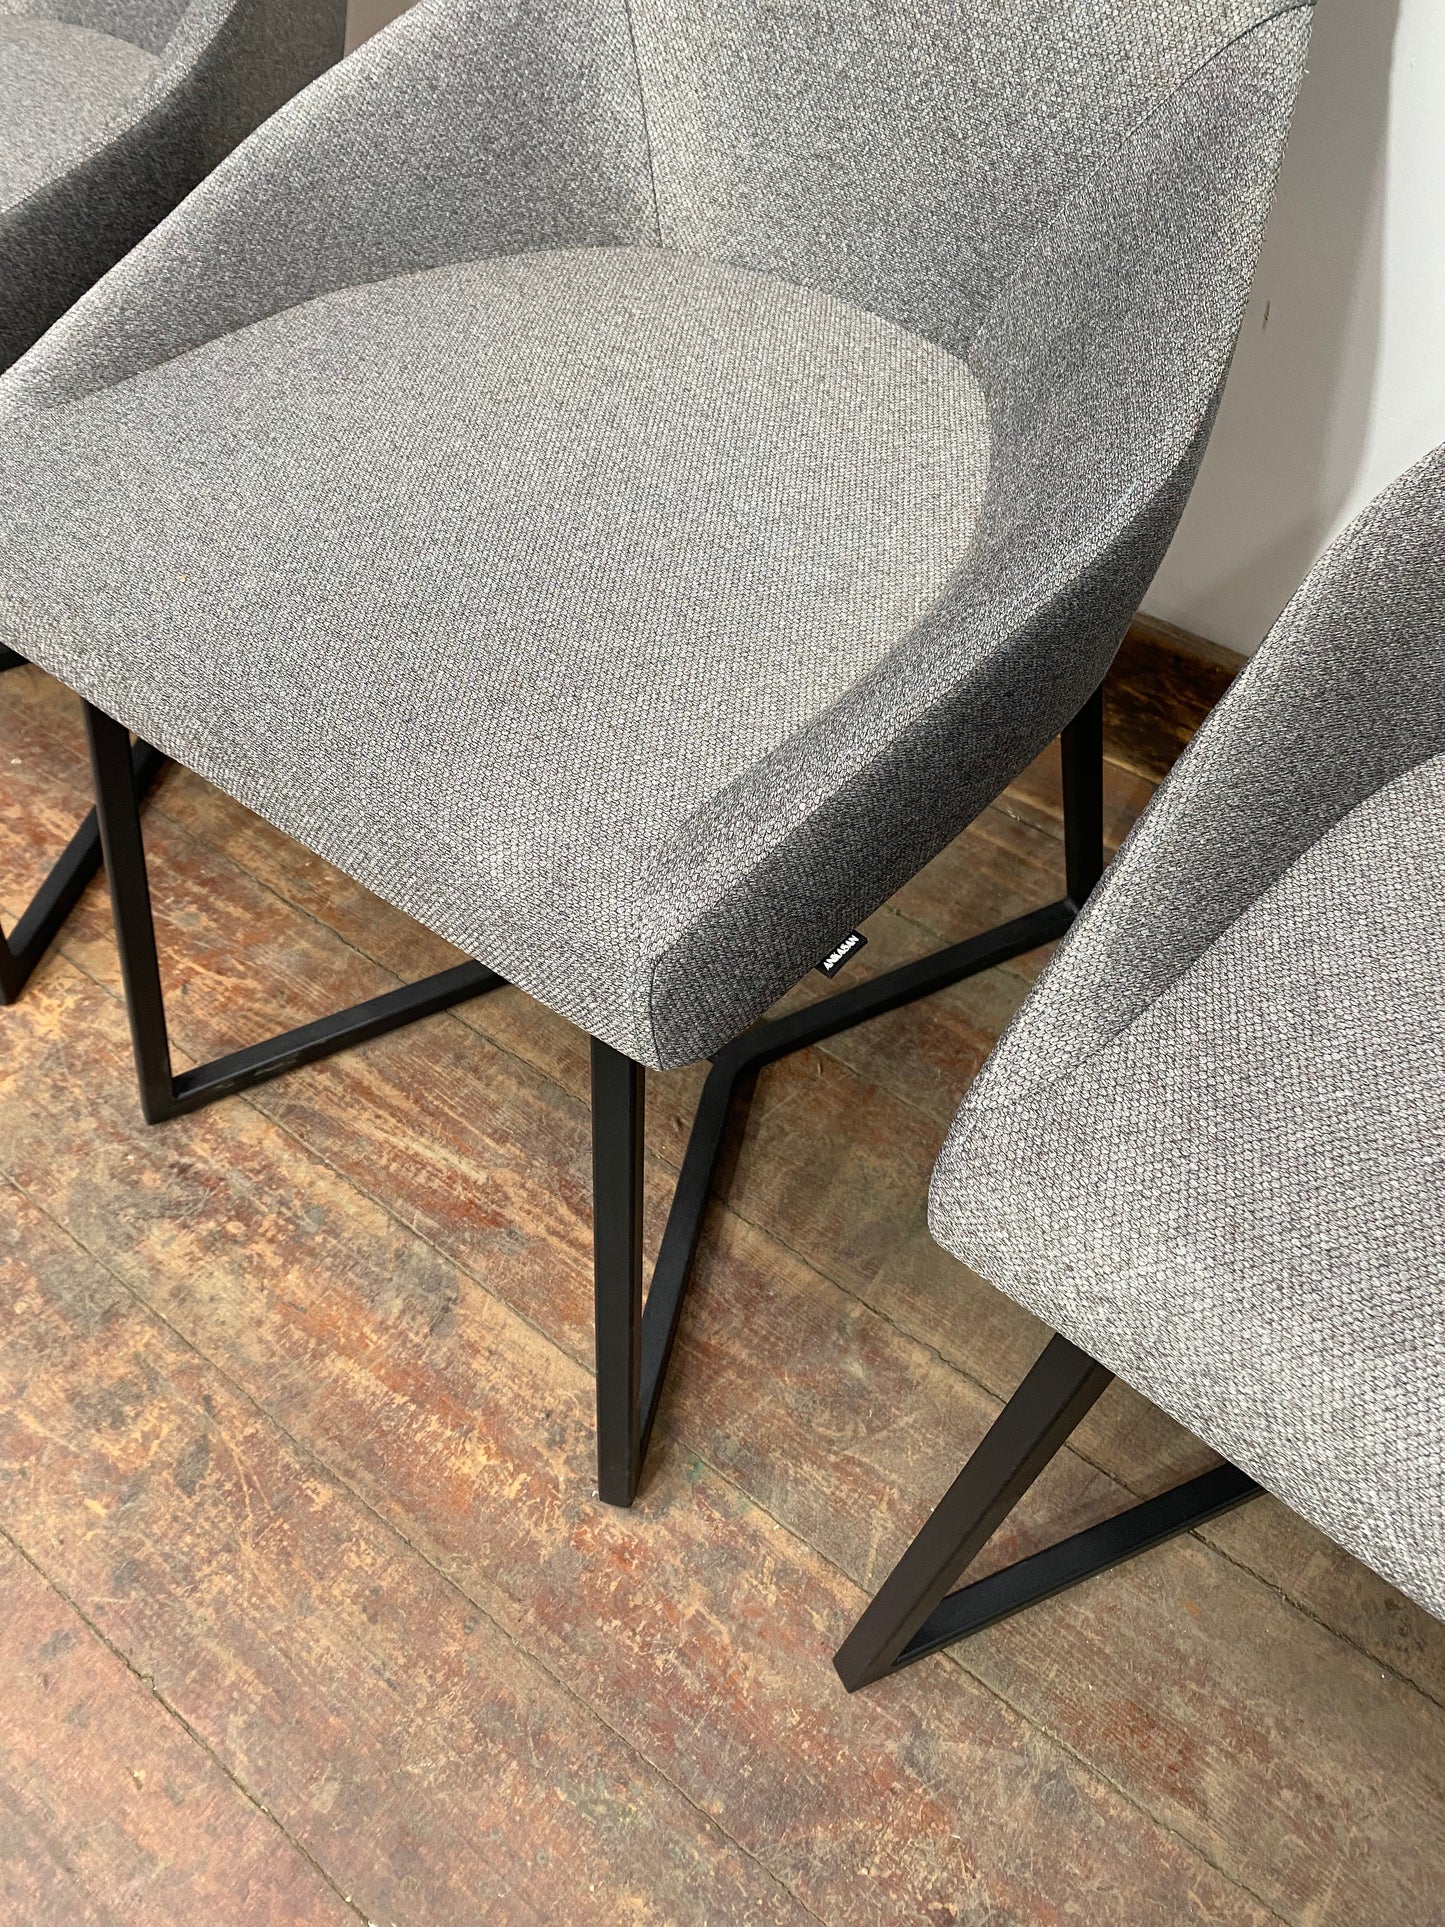 Set of 4 grey hex base office chairs (new)